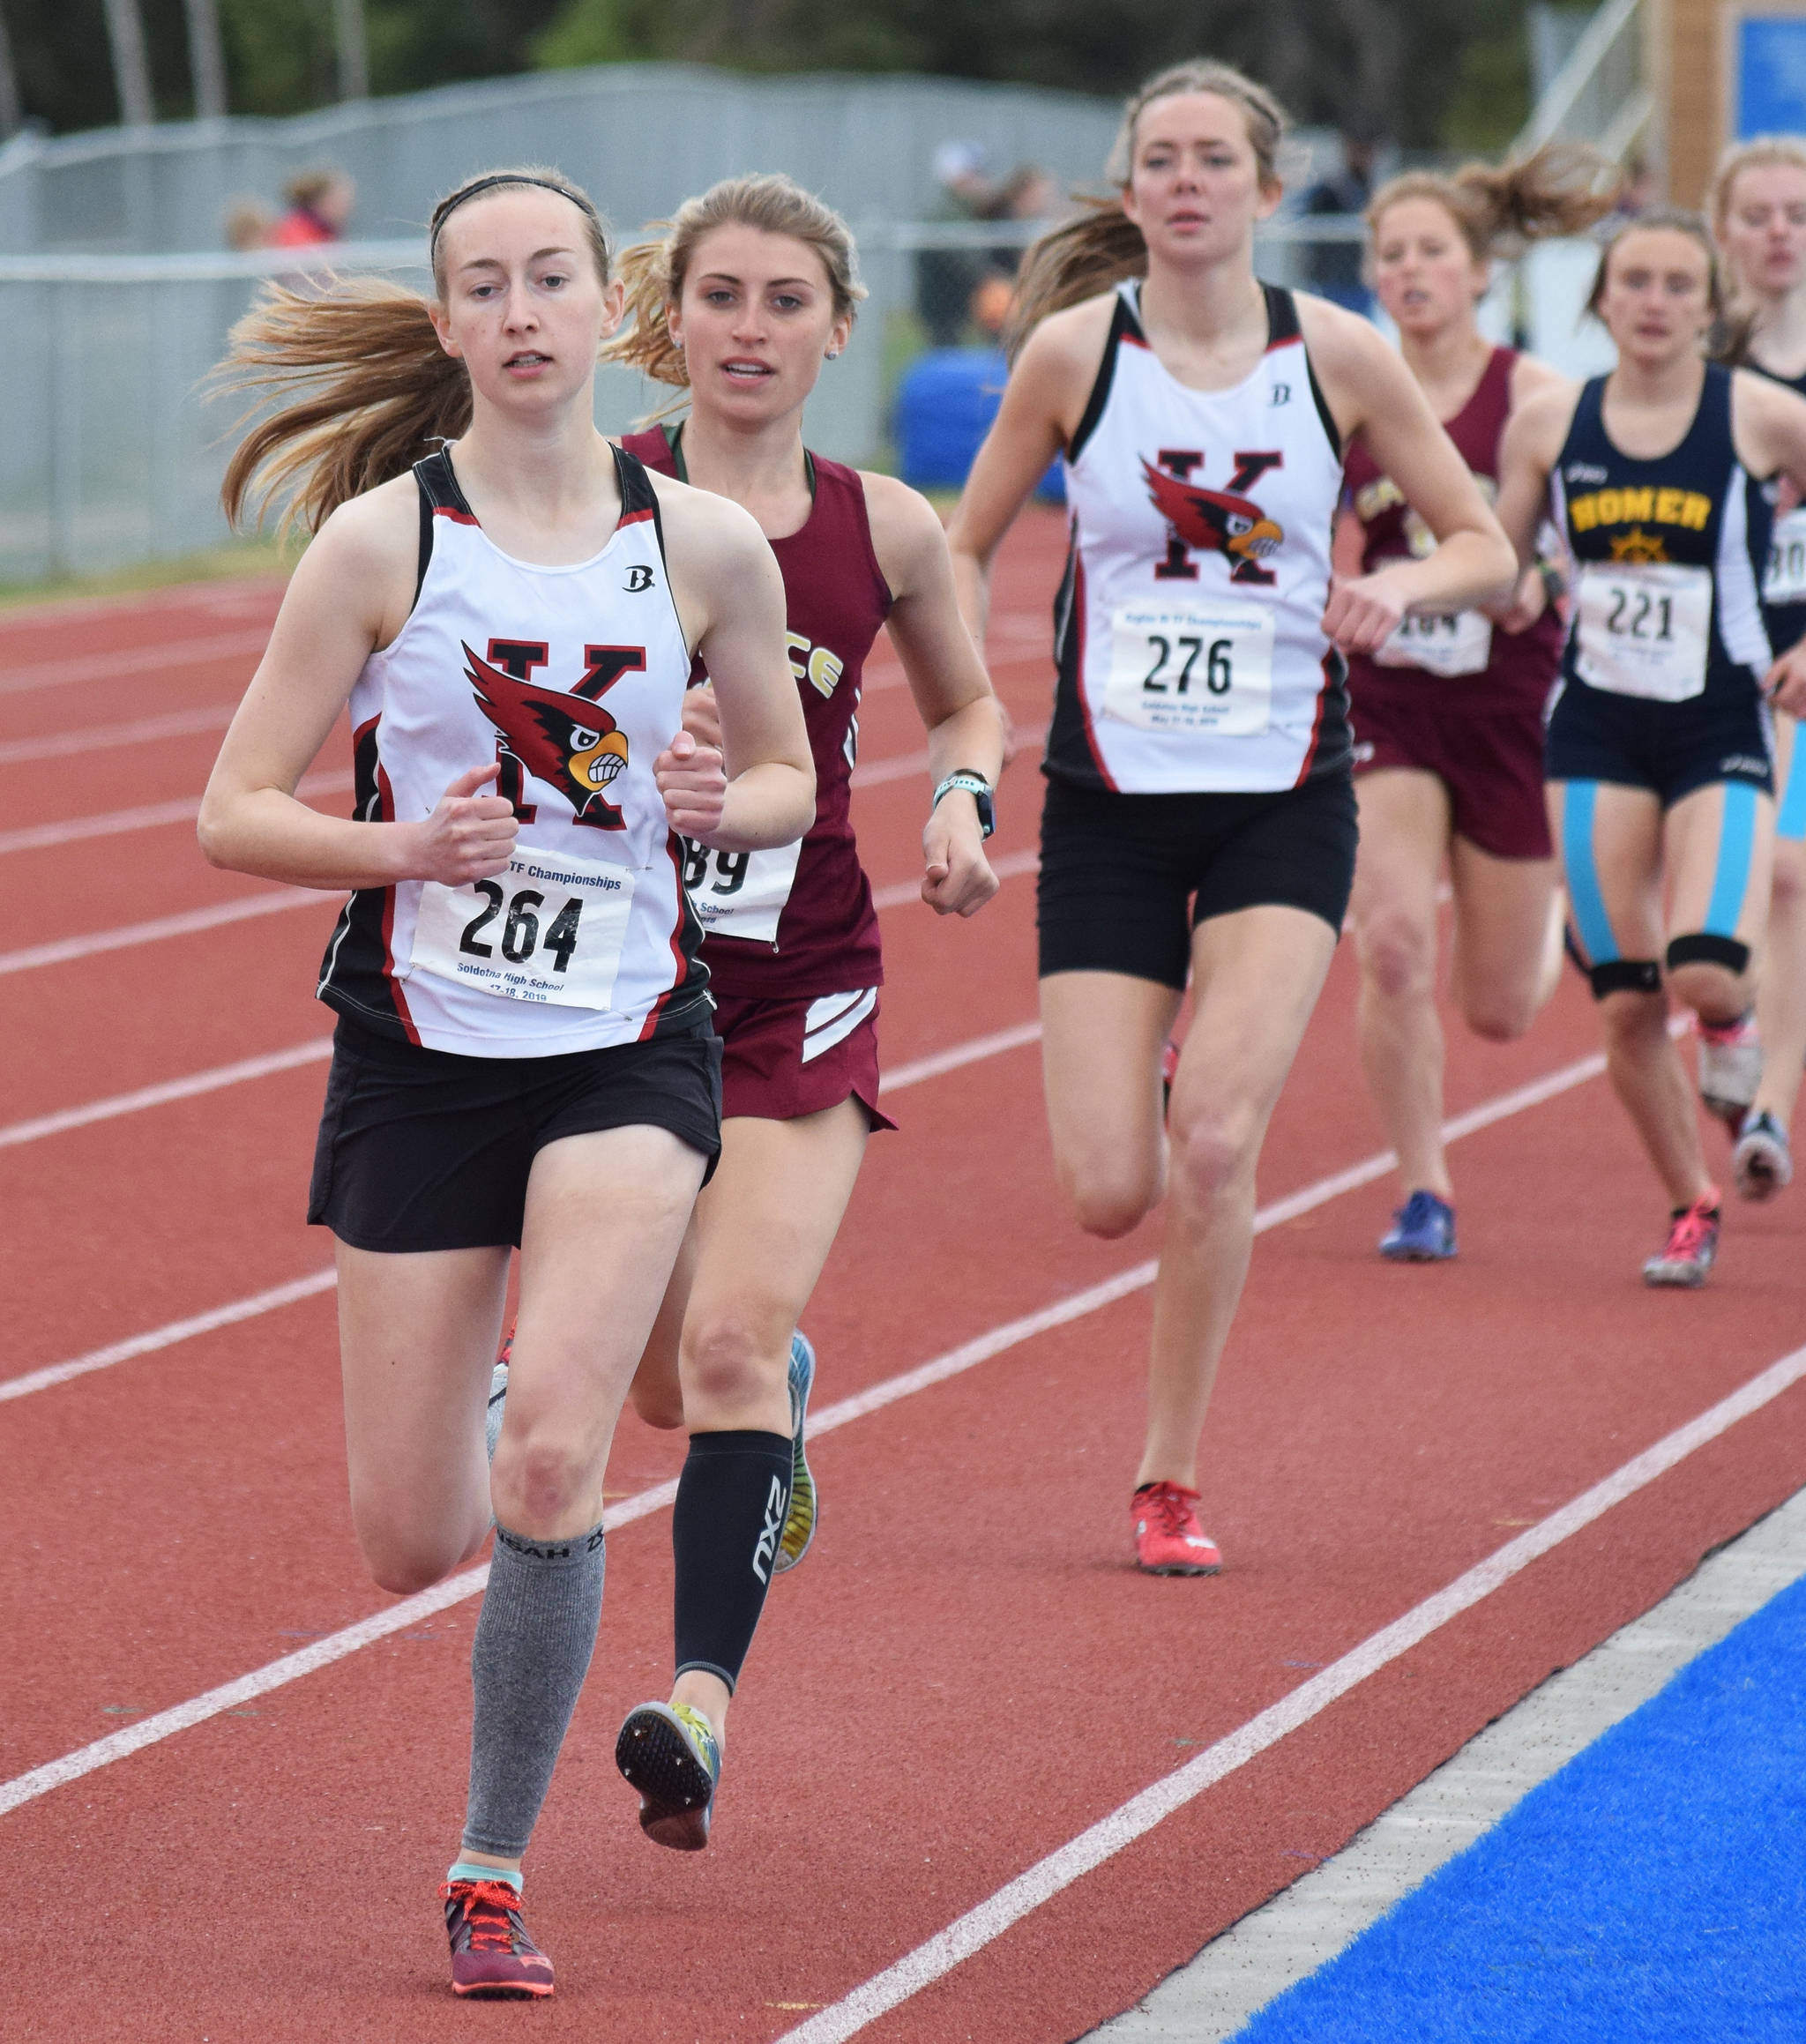 Kenai Central’s Jaycie Calvert leads the field in the Class 3A girls 1,600 meters Saturday at the Region III Track and Field Championships in Soldotna. (Photo by Joey Klecka/Peninsula Clarion)